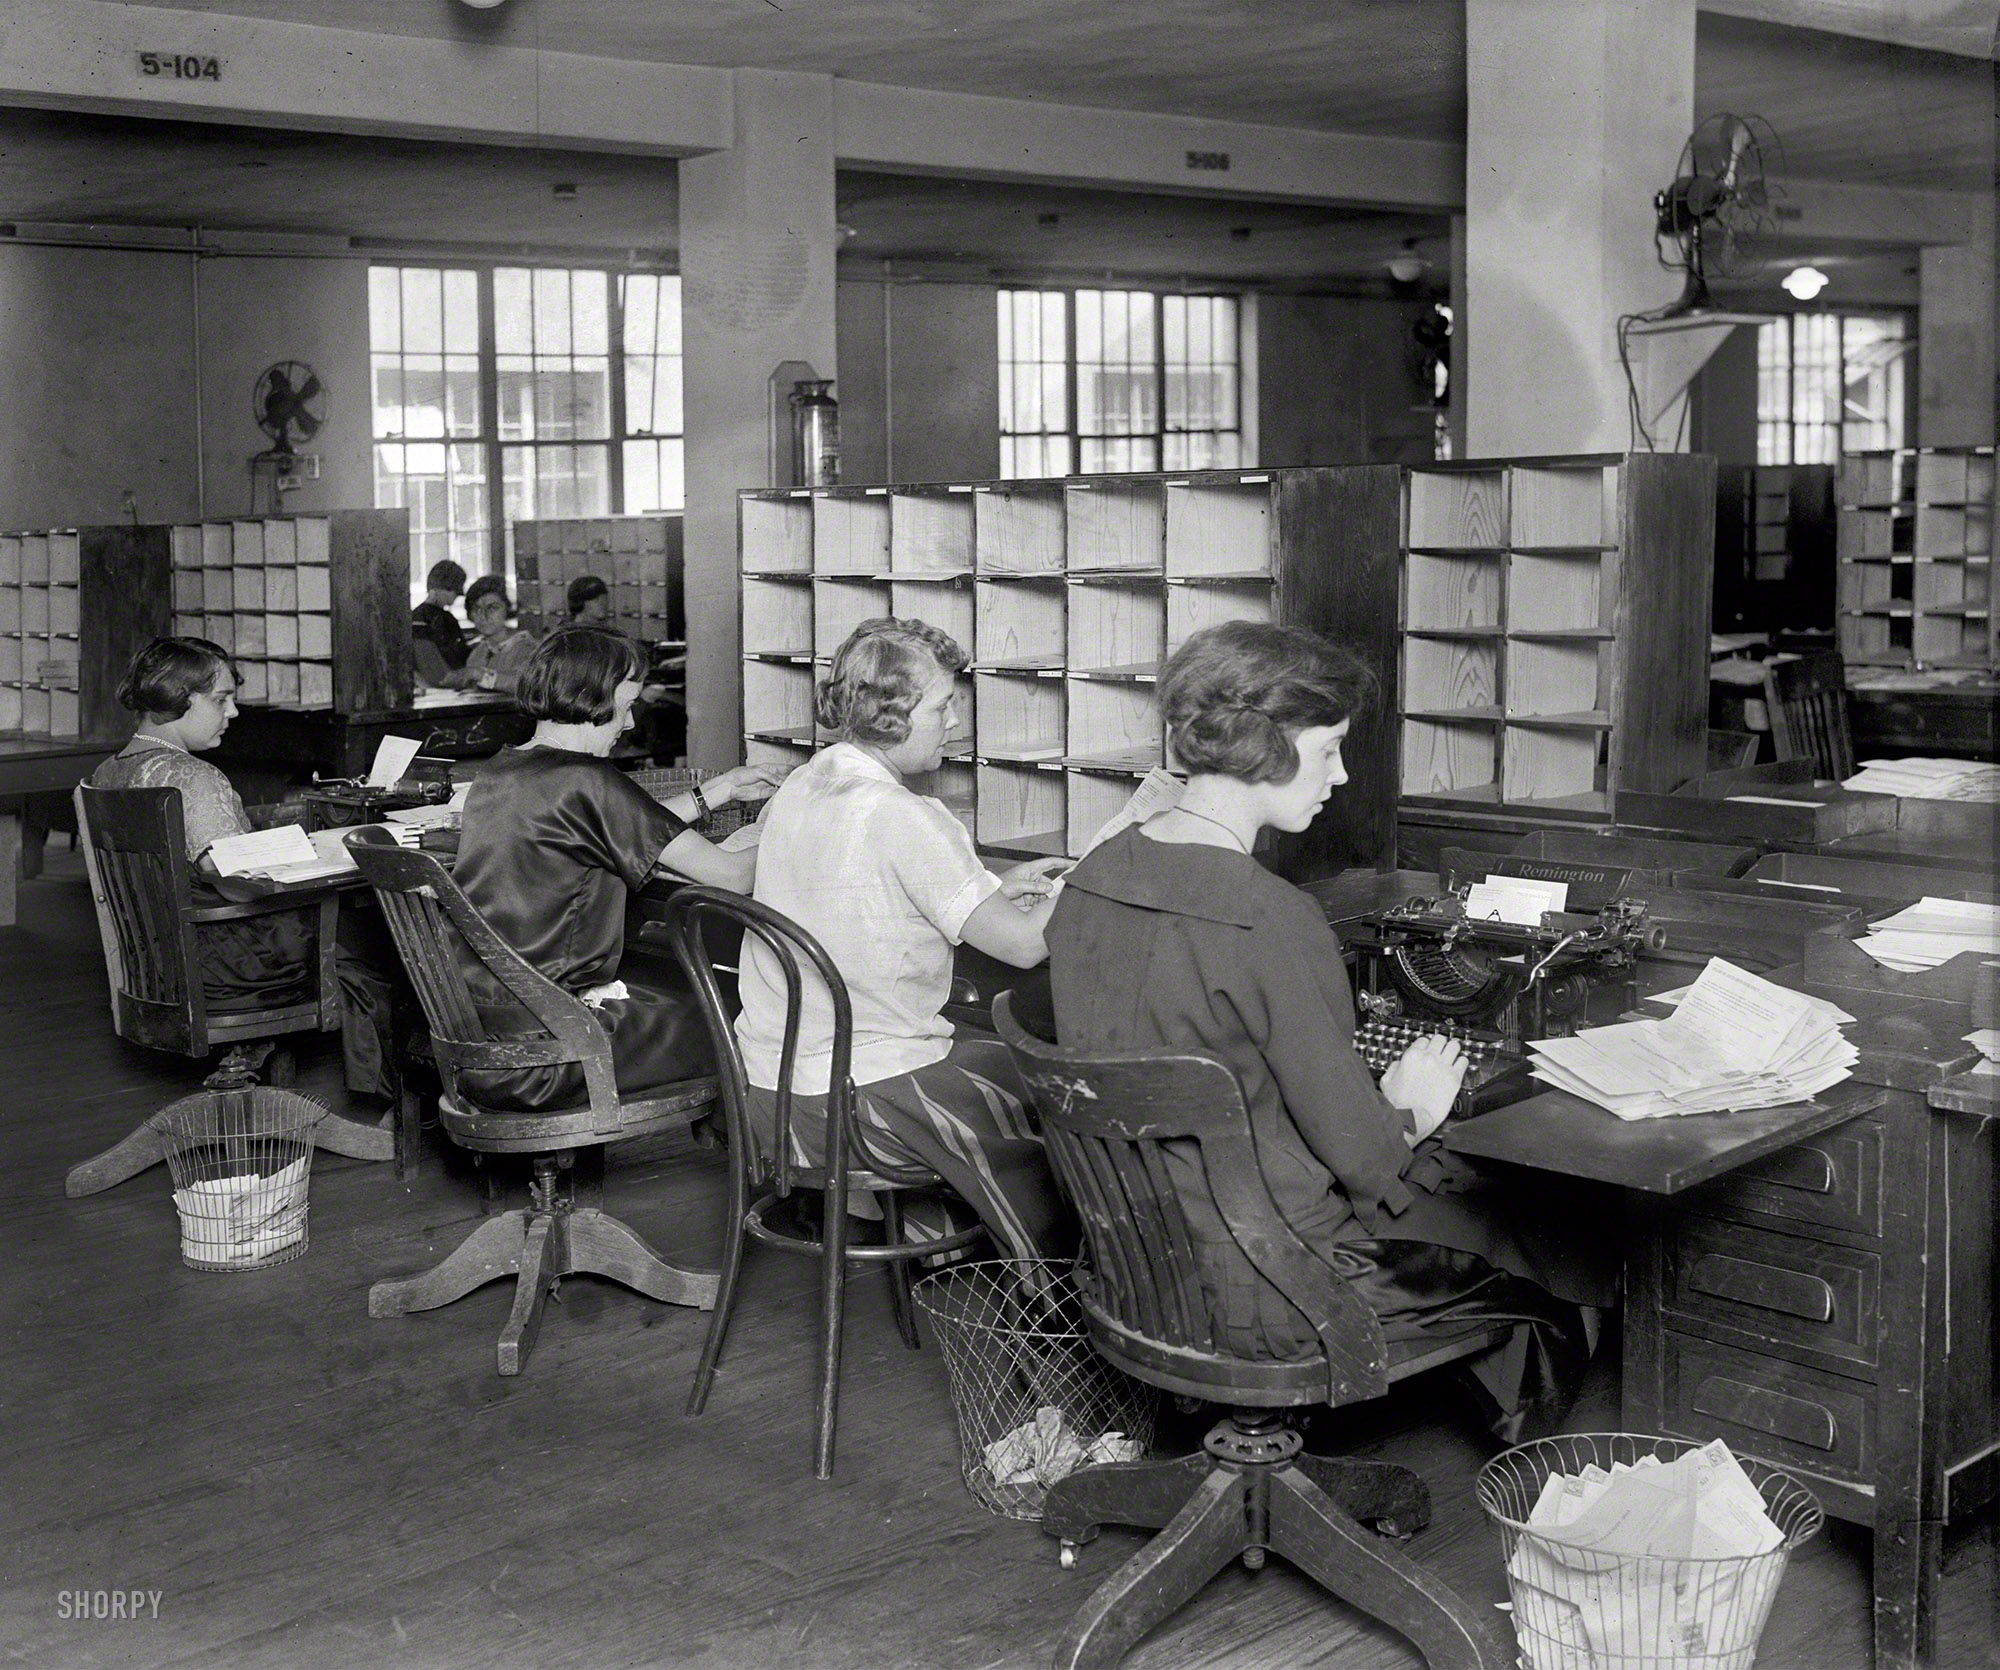 November 24, 1924. Washington, D.C. "Bonus Bureau -- Examining Division." The "bonus" was a benefit granted to WWI veterans by the World War Adjusted Compensation Act of 1924. National Photo glass negative. View full size.